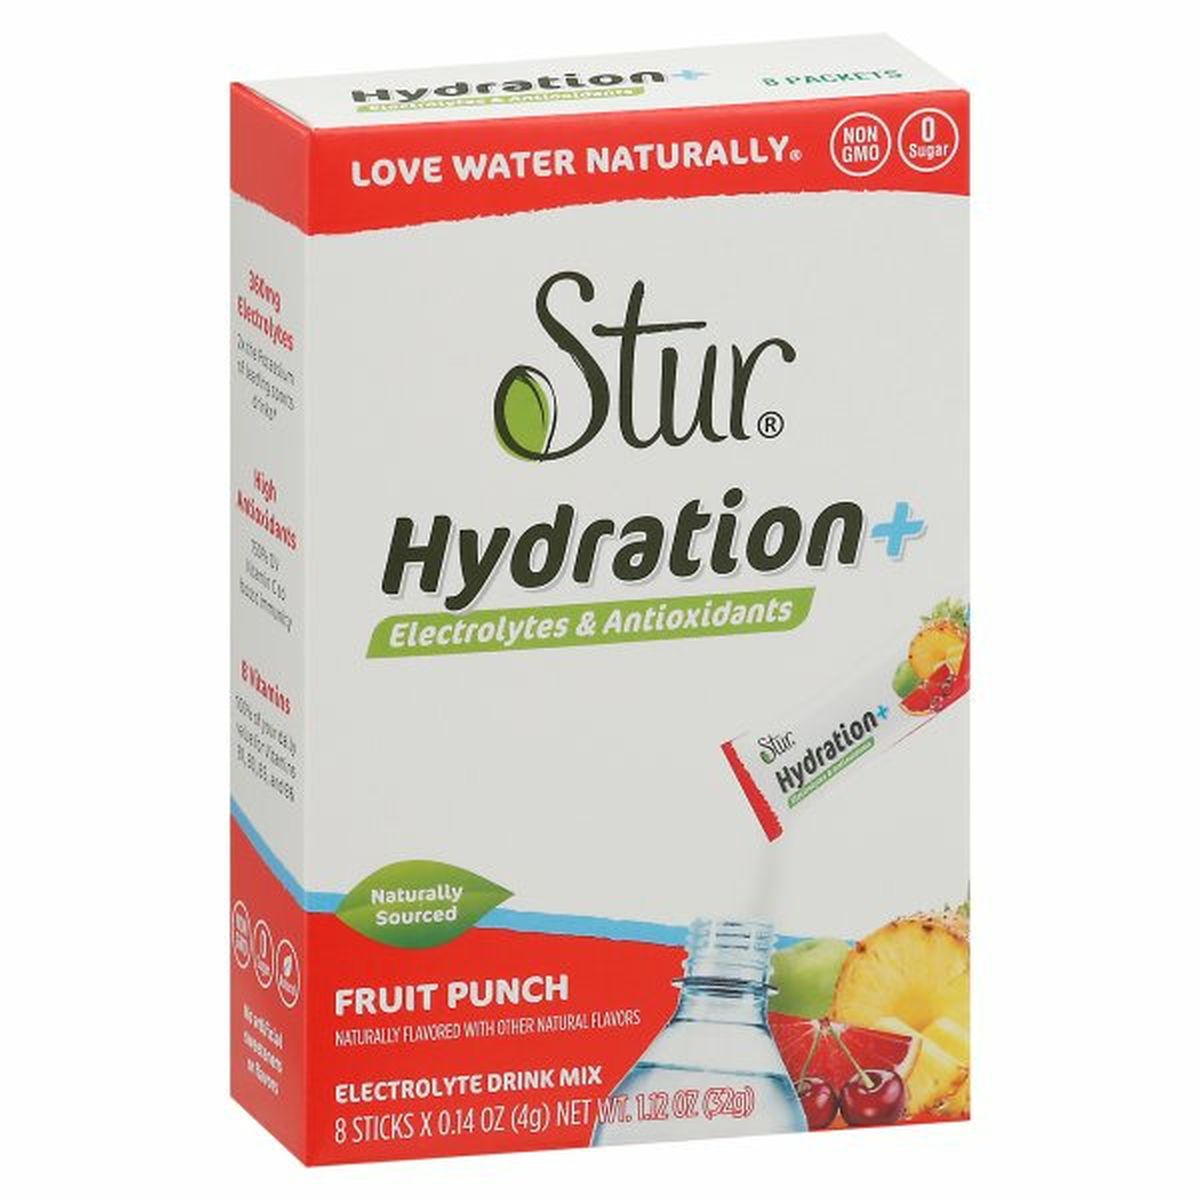 Calories in Stur Hydration + Electrolyte Drink Mix, Fruit Punch